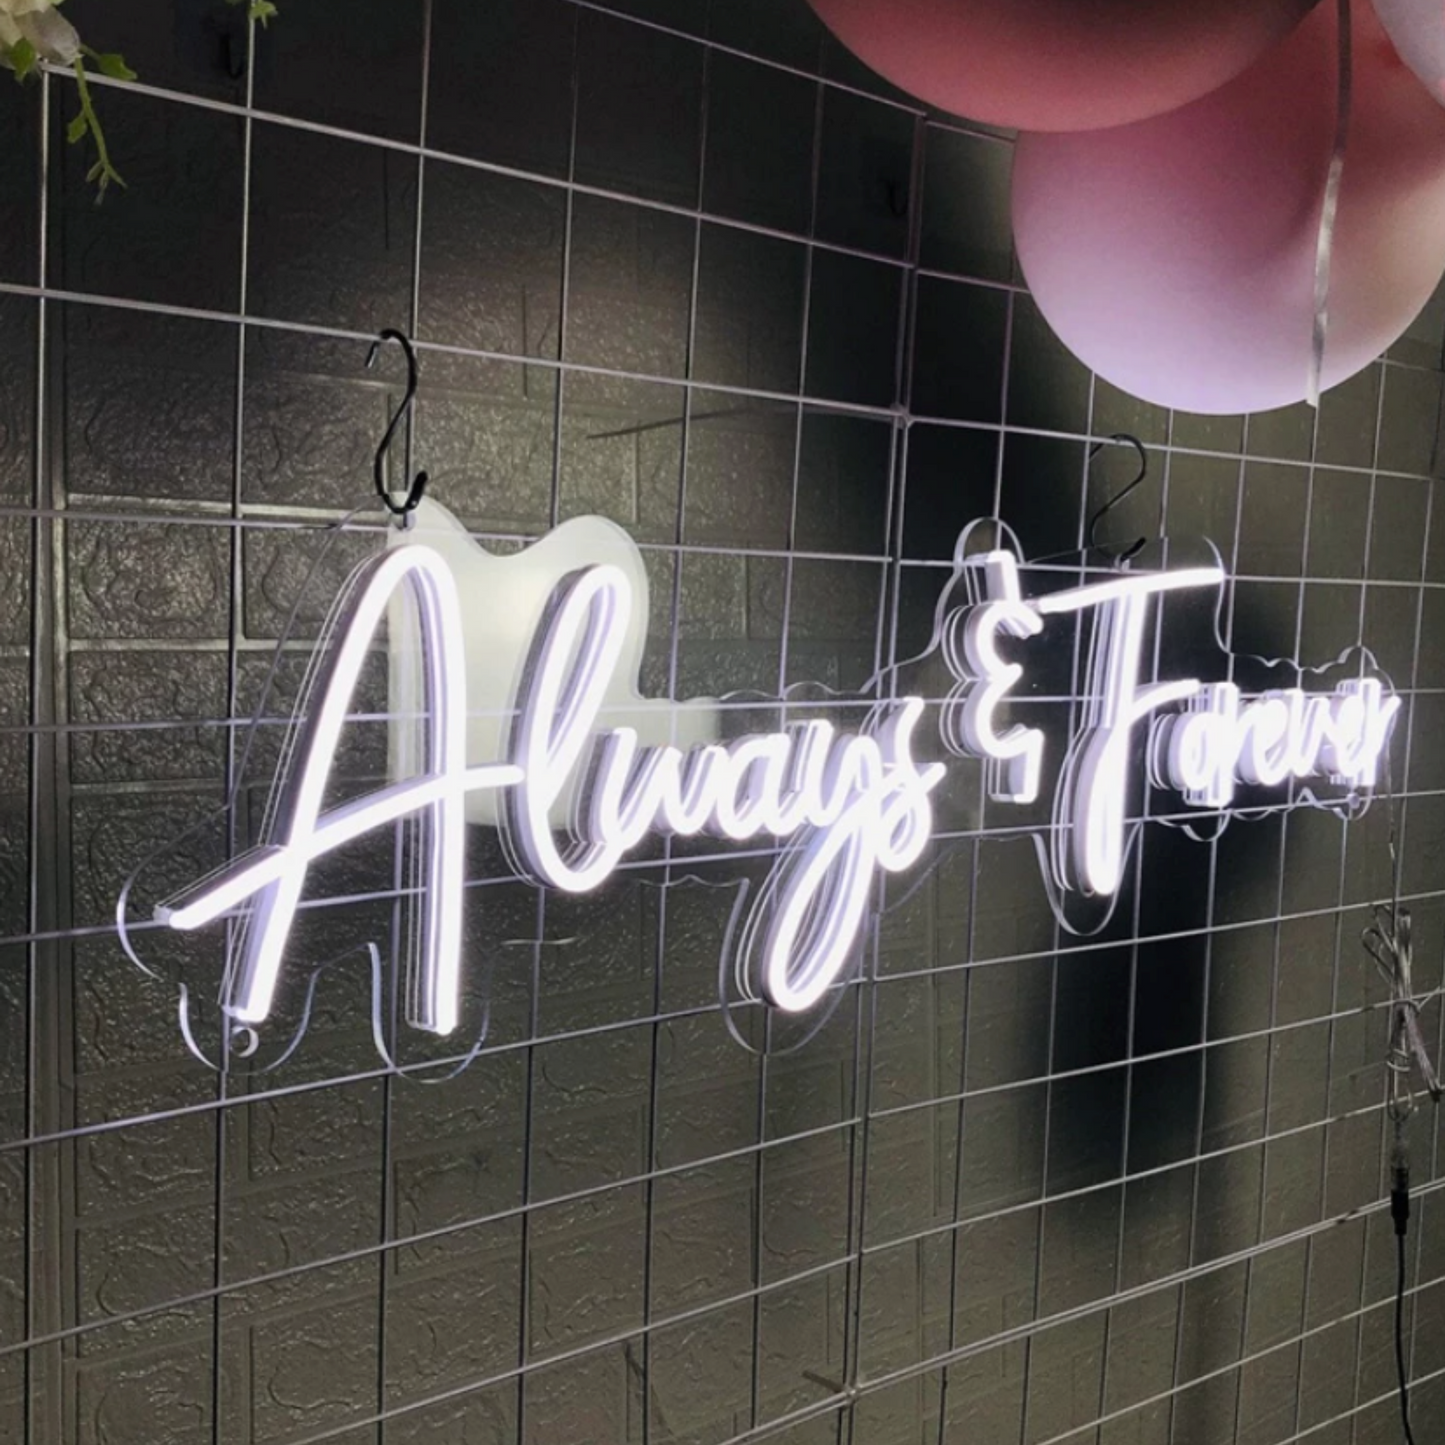 Always & Forever Neon Sign